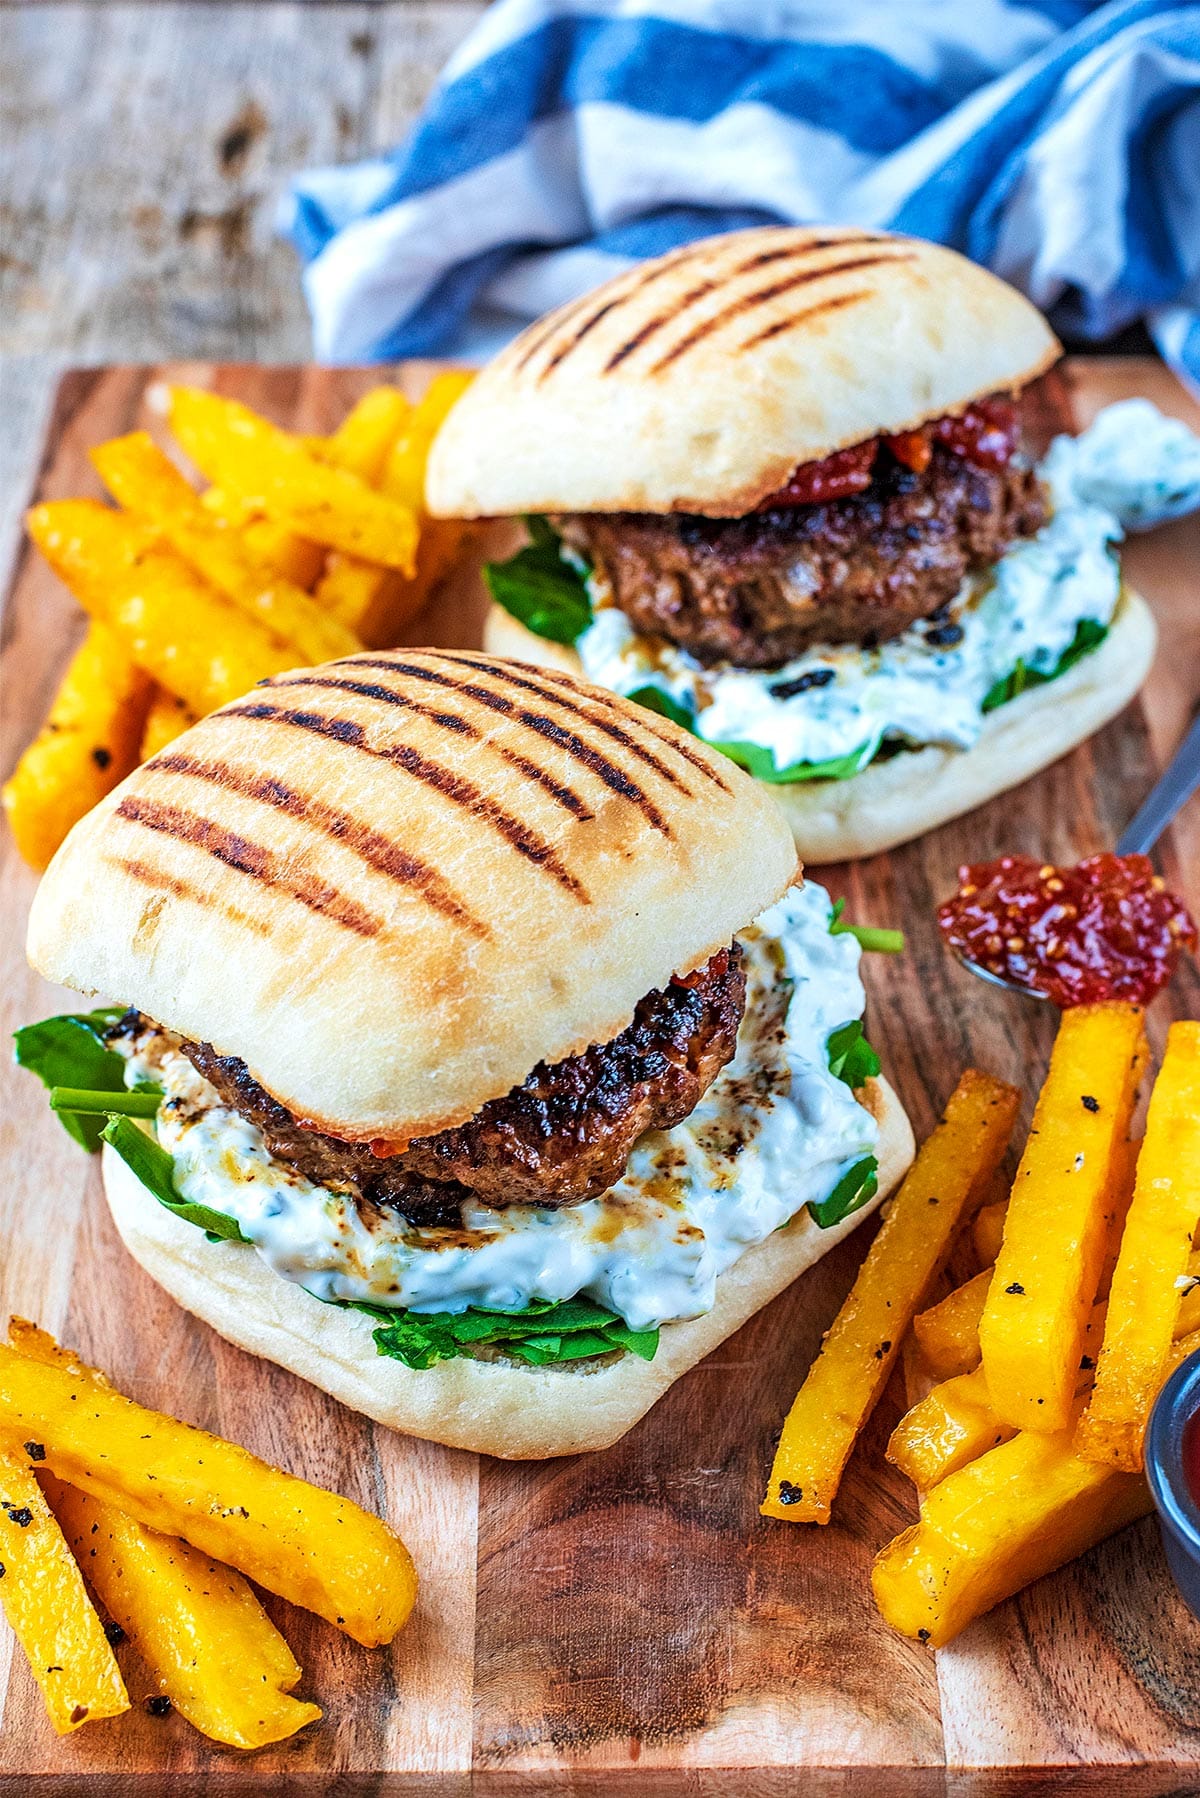 Two Spiced Lamb Burgers on a wooden board with fries and dip.